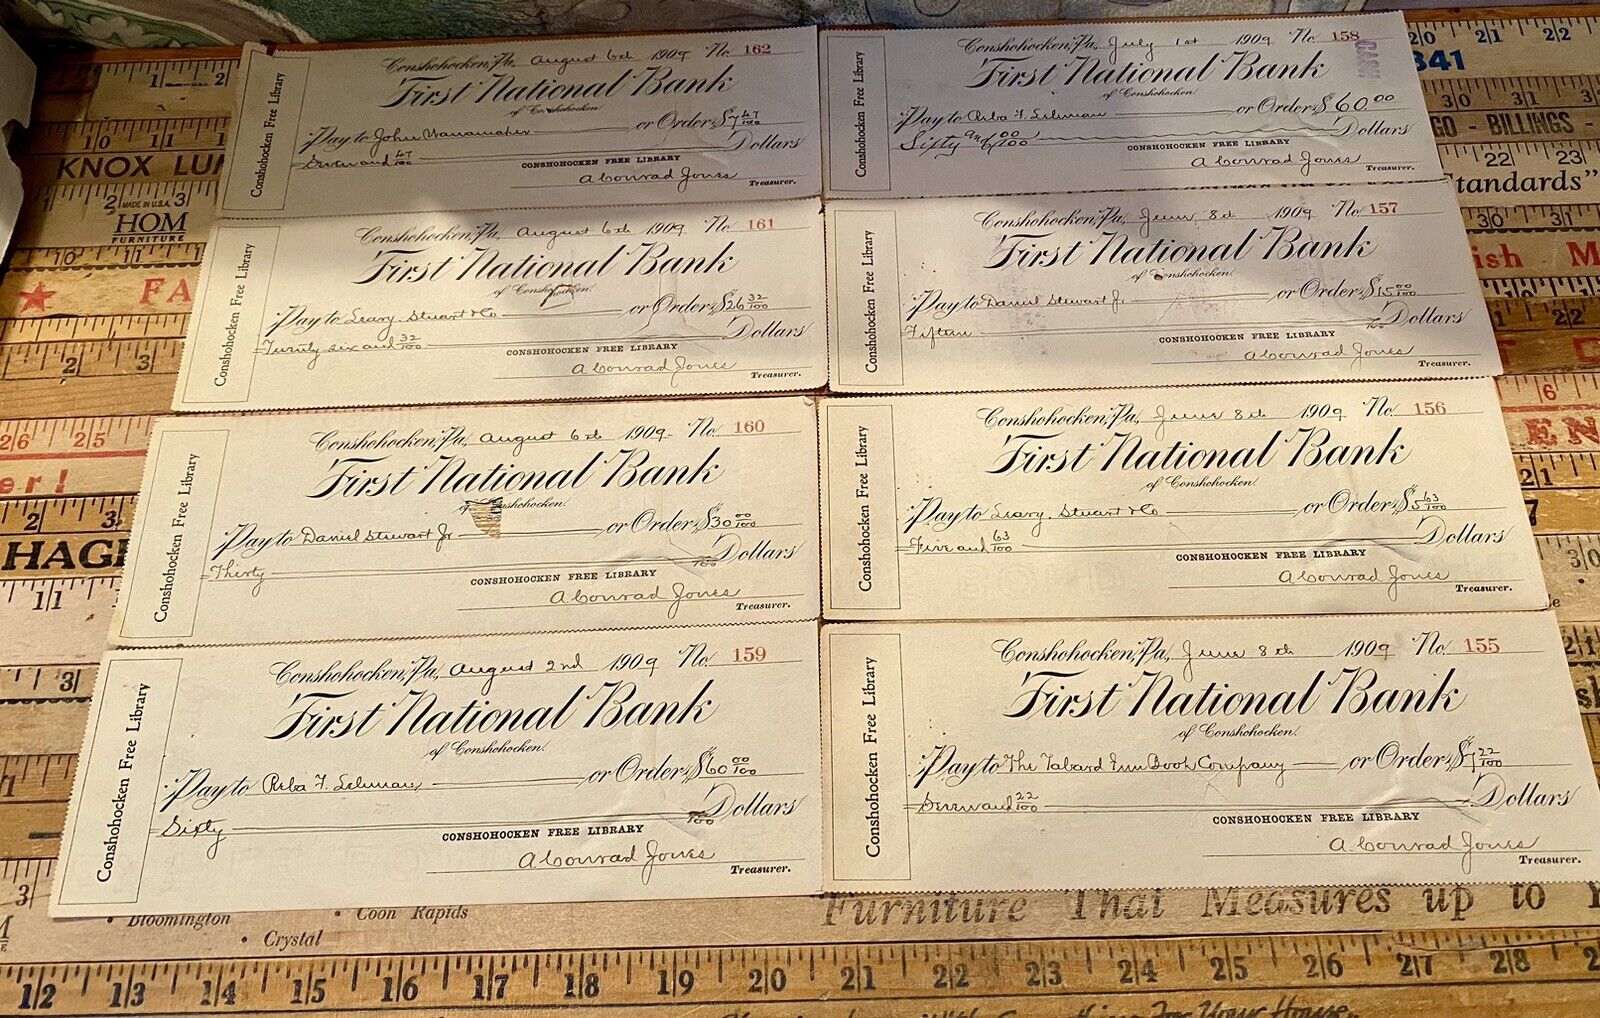 8 Sequential (#155-162) 1909 Antique Cancelled Checks - First National Bank 